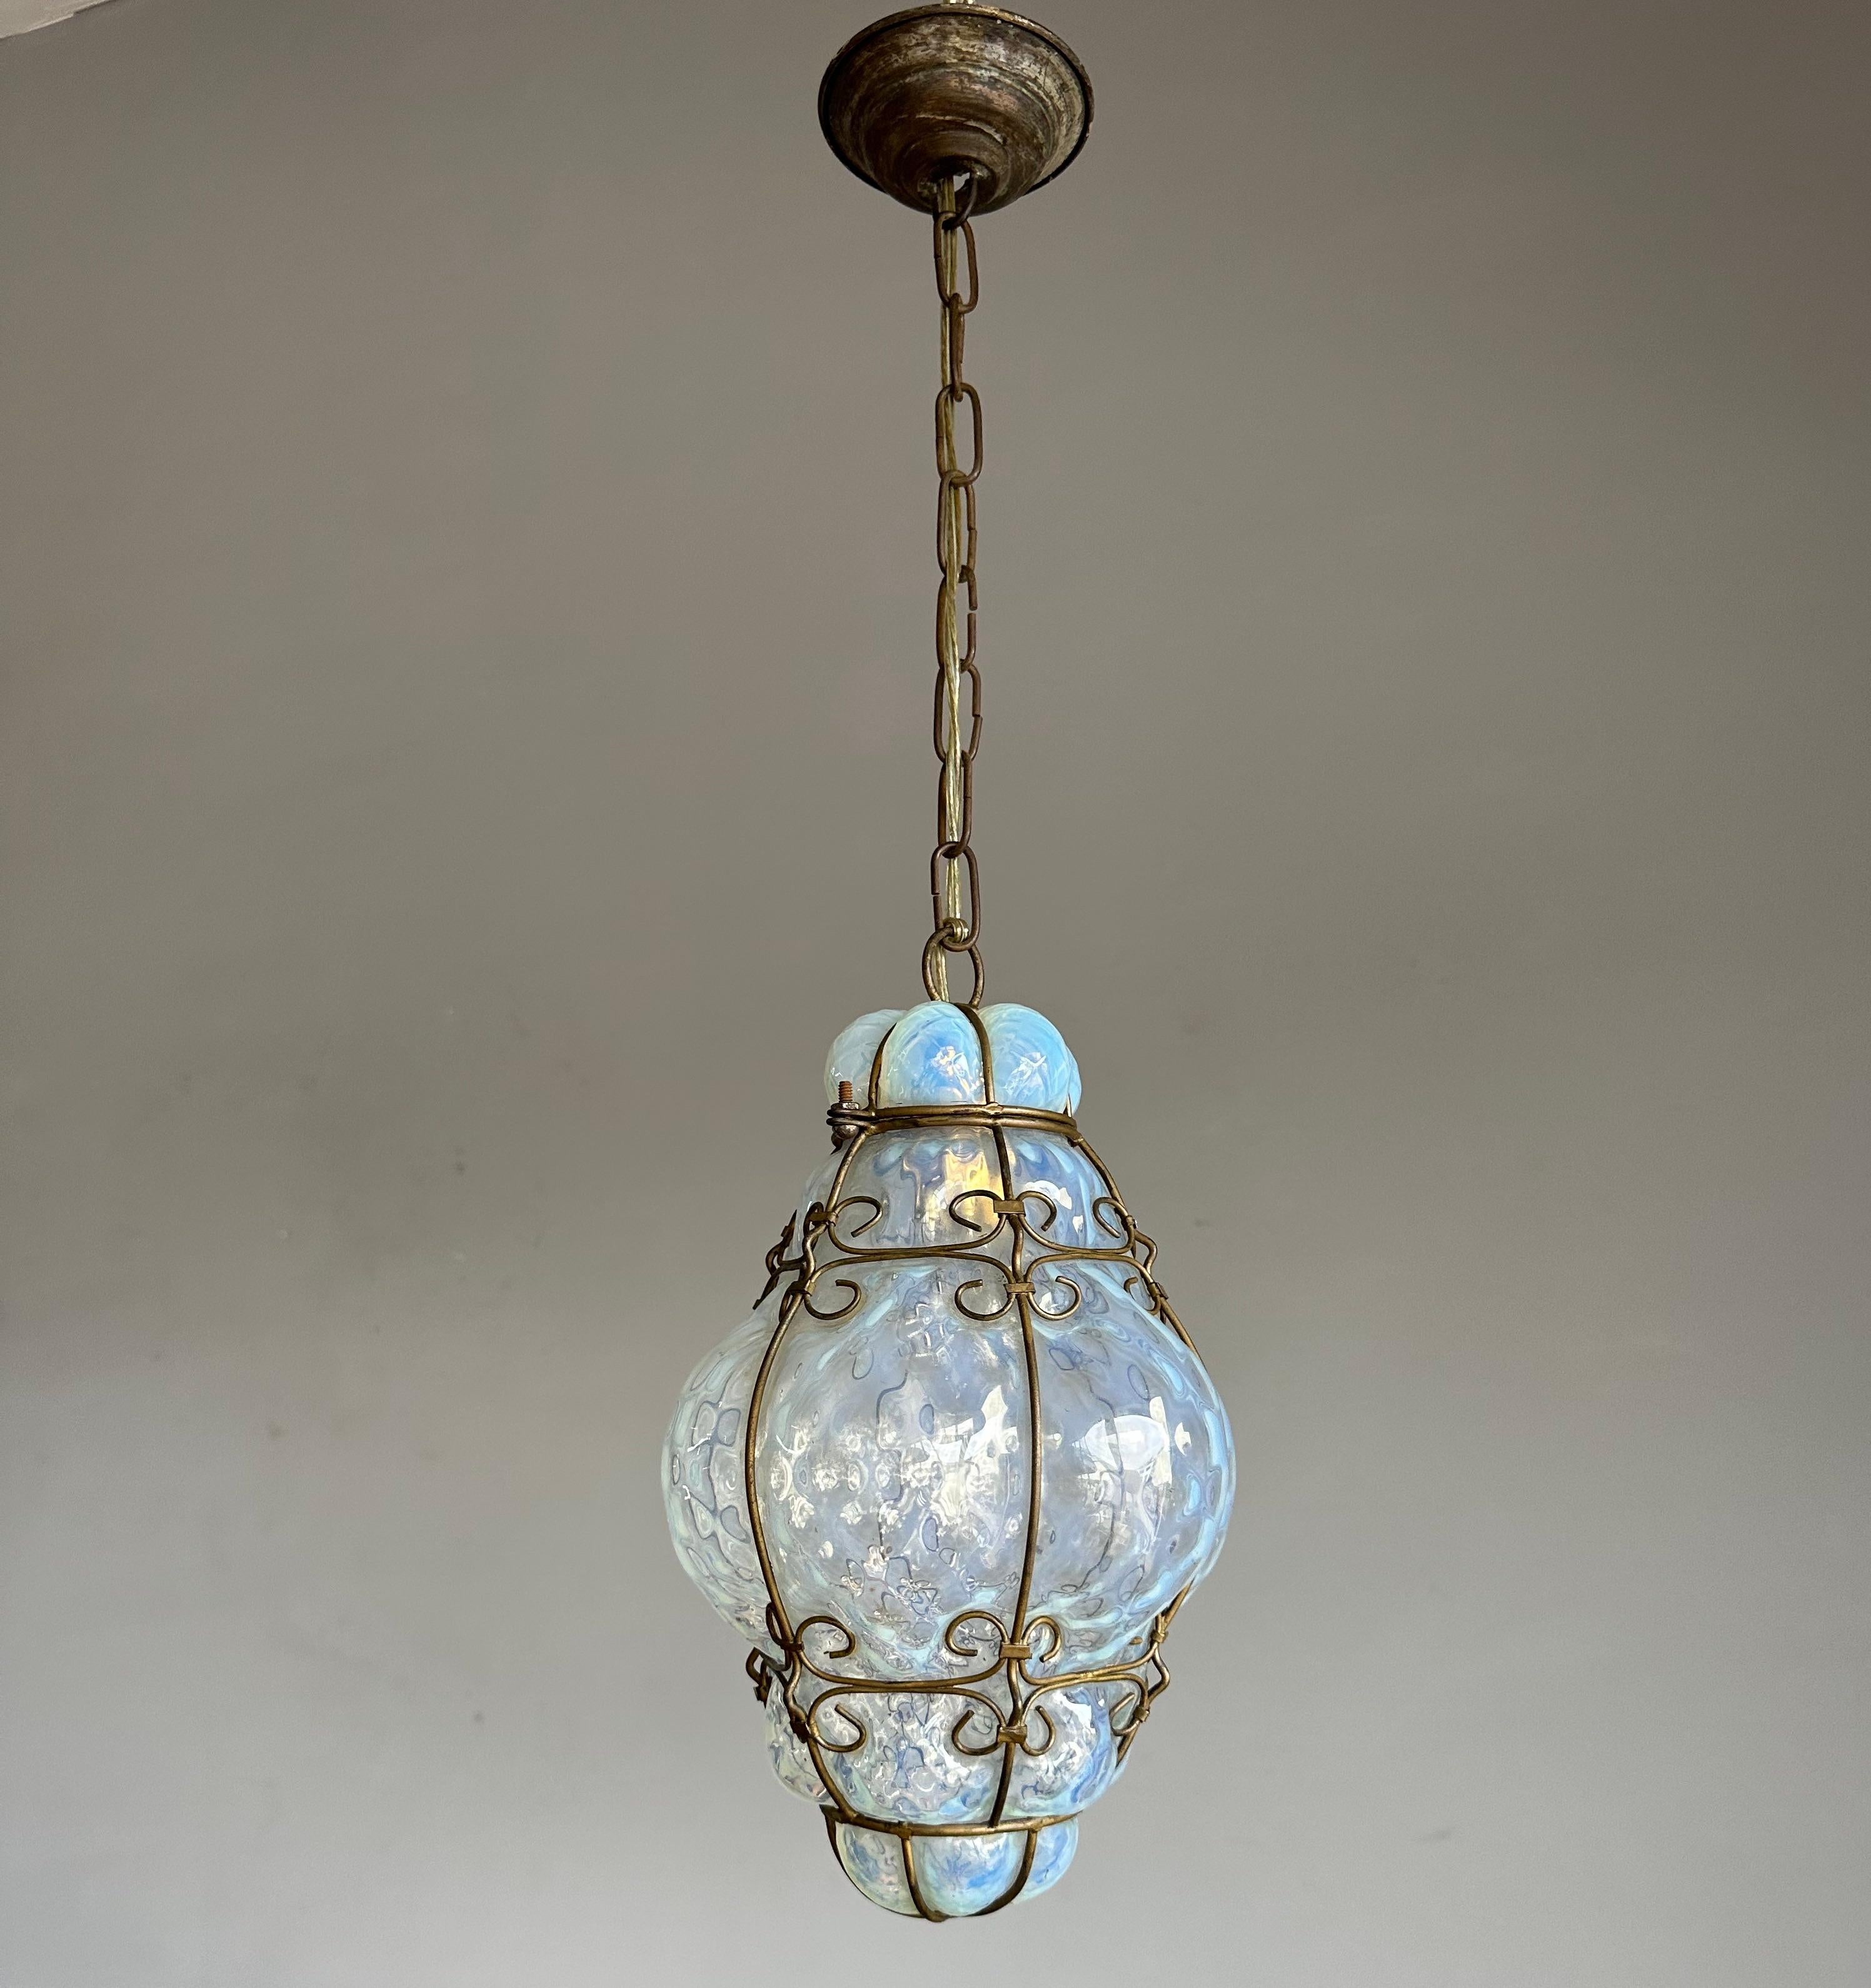 Small & brilliant Venetian pendant. Perfect blue opalescent glass in a forged wrought iron frame.

This small size antique Venetian pendant light is the only one we ever found with opalescent mouthblown glass. It makes this Murano pendant extra